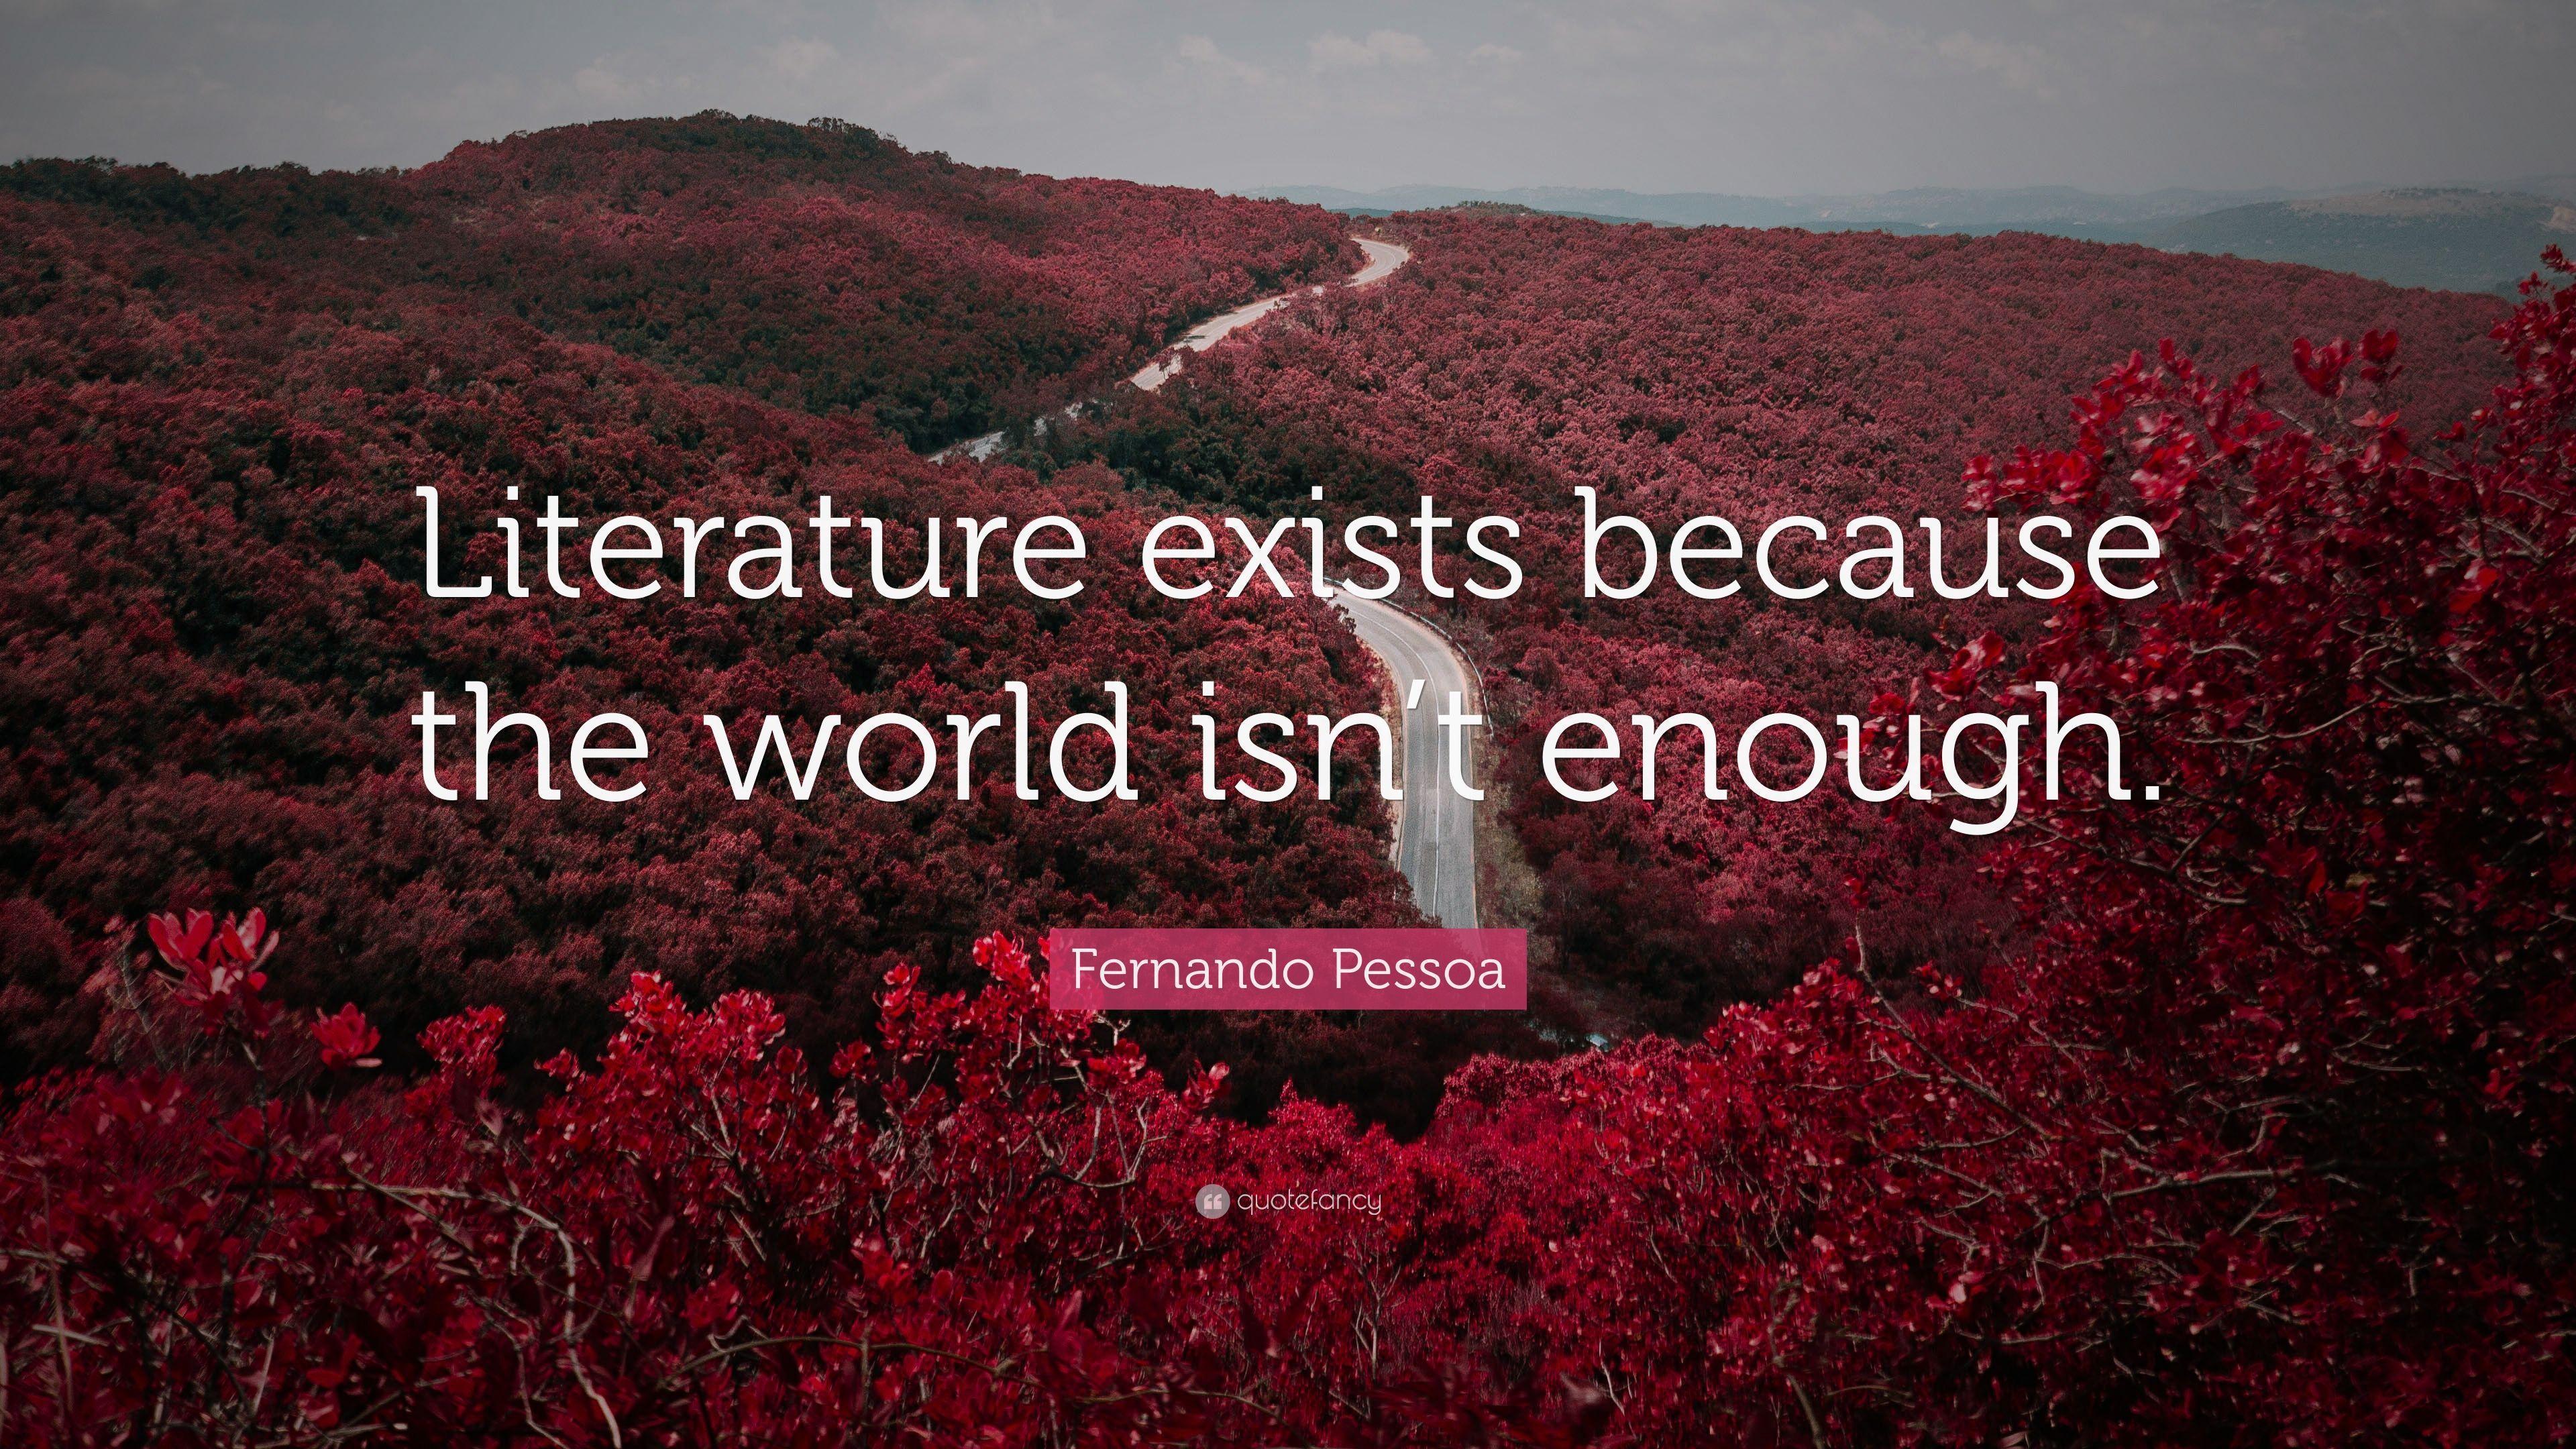 Fernando Pessoa Quote: “Literature exists because the world isn't